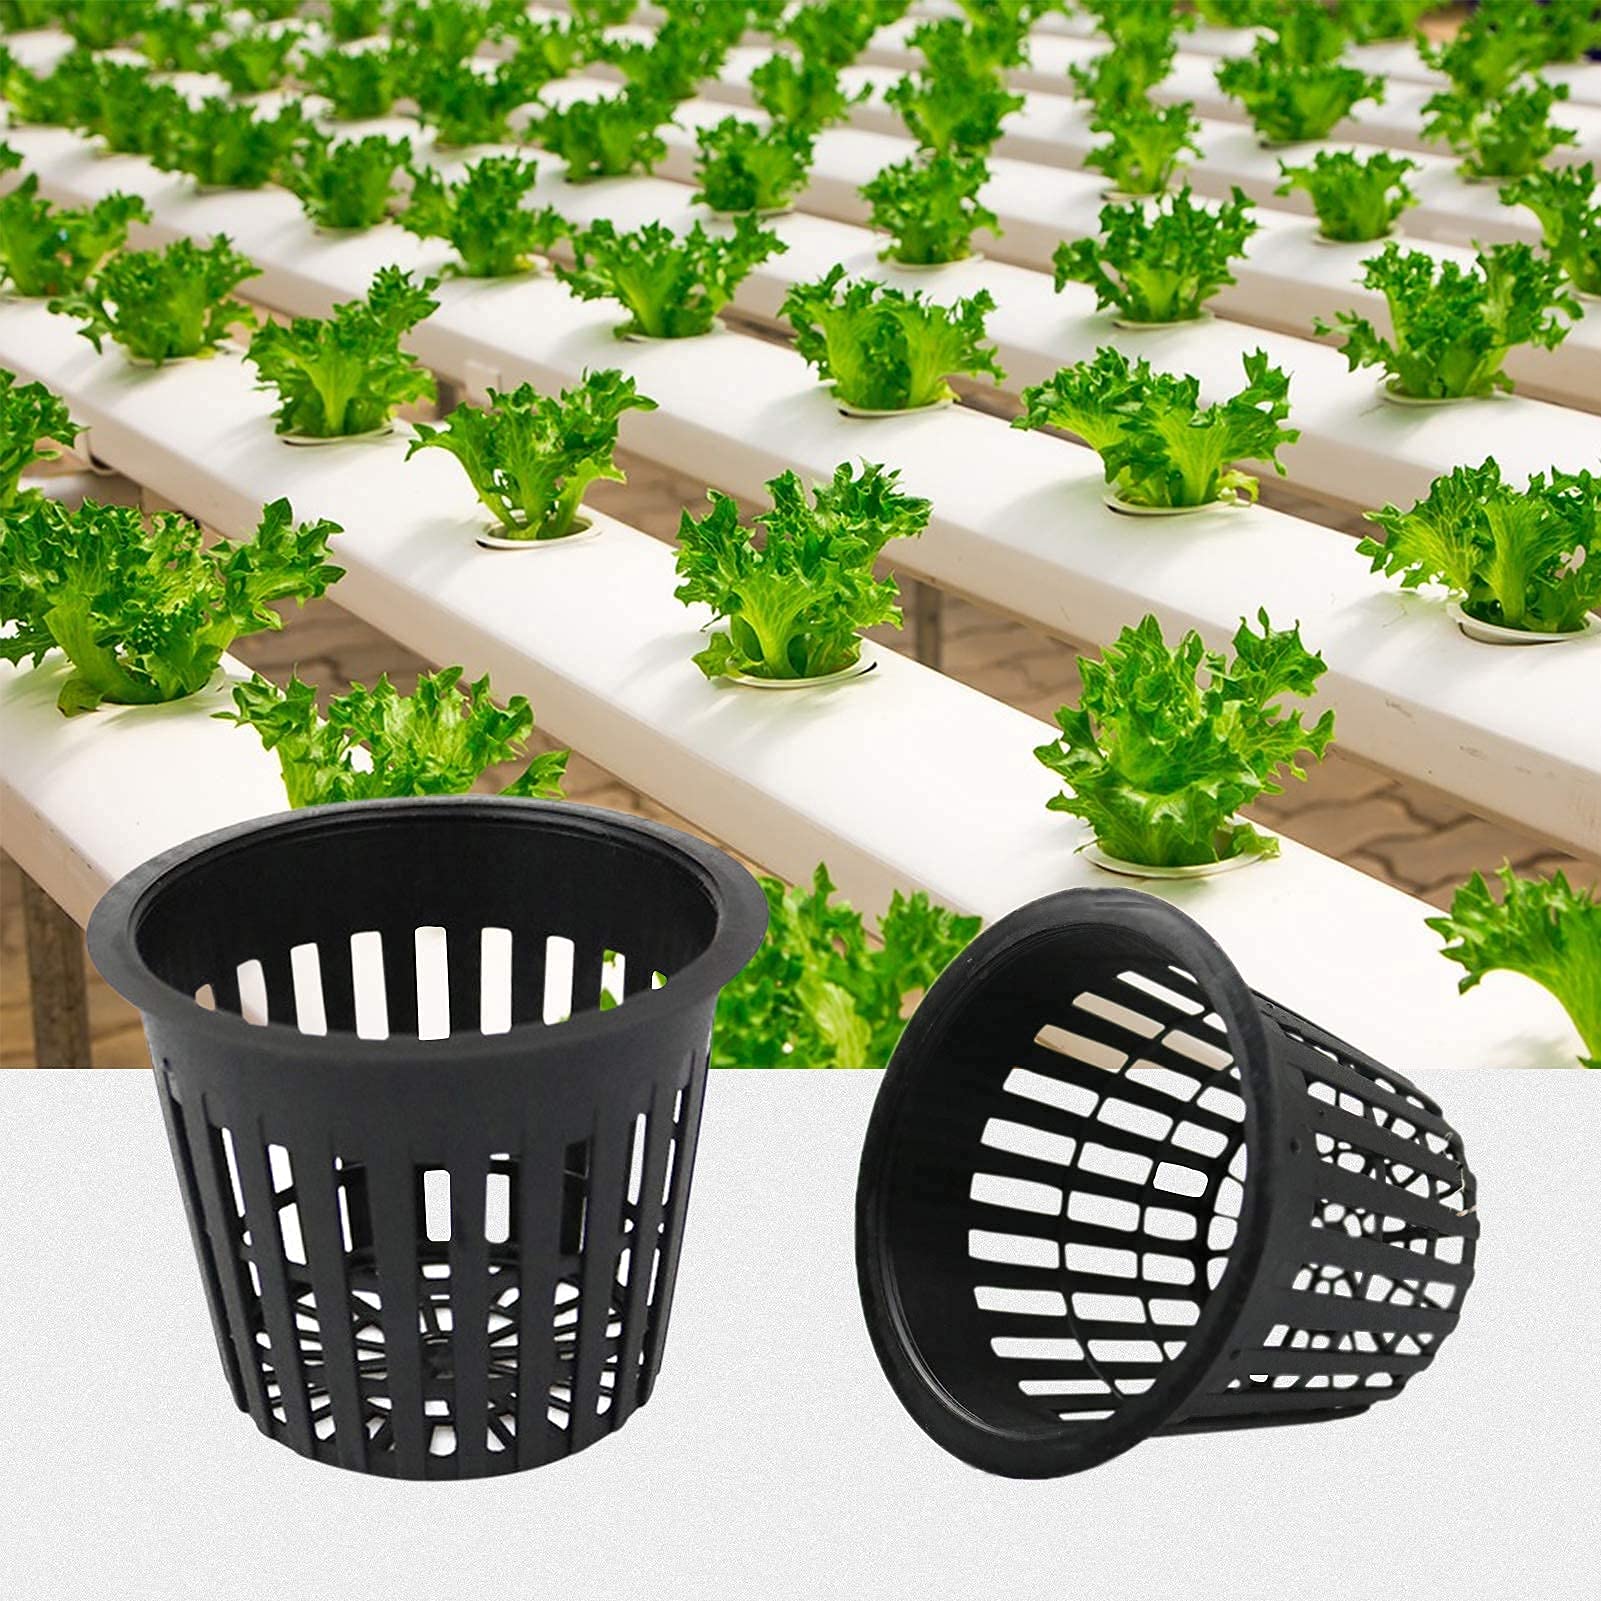 Business King 3 Inch Net Pots for Hydroponics 30 Packs with Plant Labels 30Pcs Heavy Duty Wide Mouth Net Cups Slotted Mesh Pot hydroponics Supplies